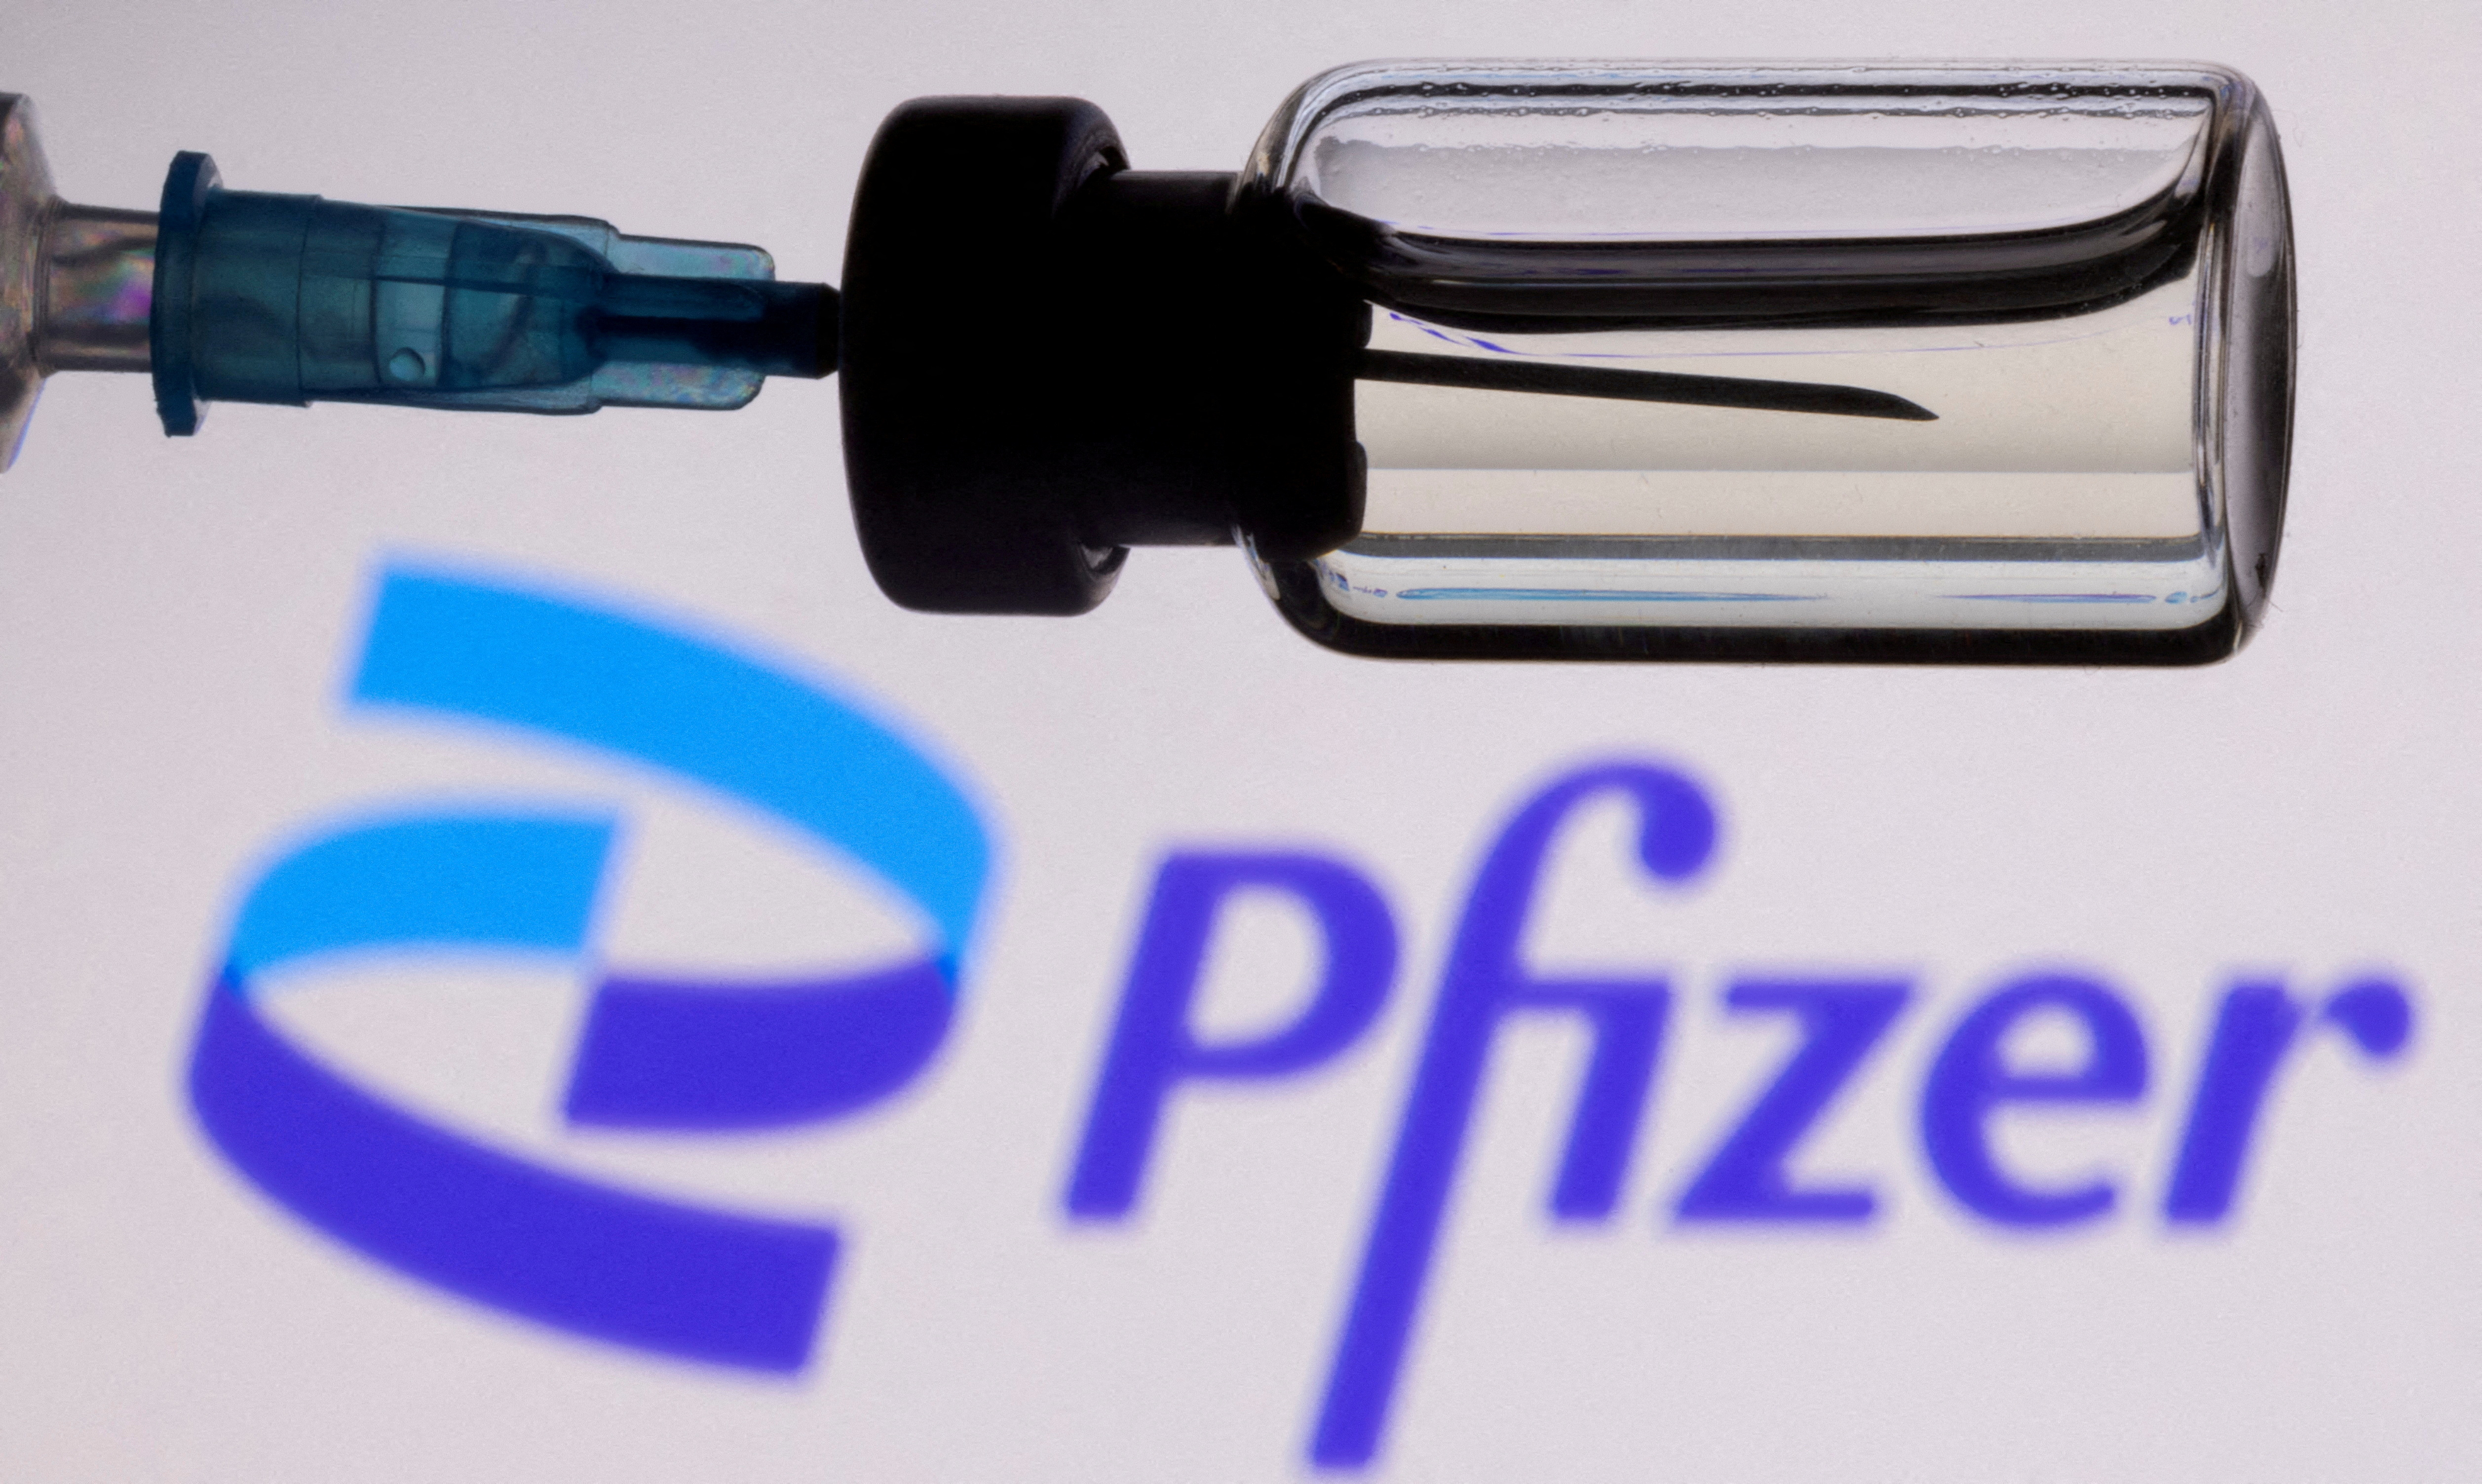 Pfizer sees $10 bln-$15 bln in potential revenue from mRNA vaccines by 2030